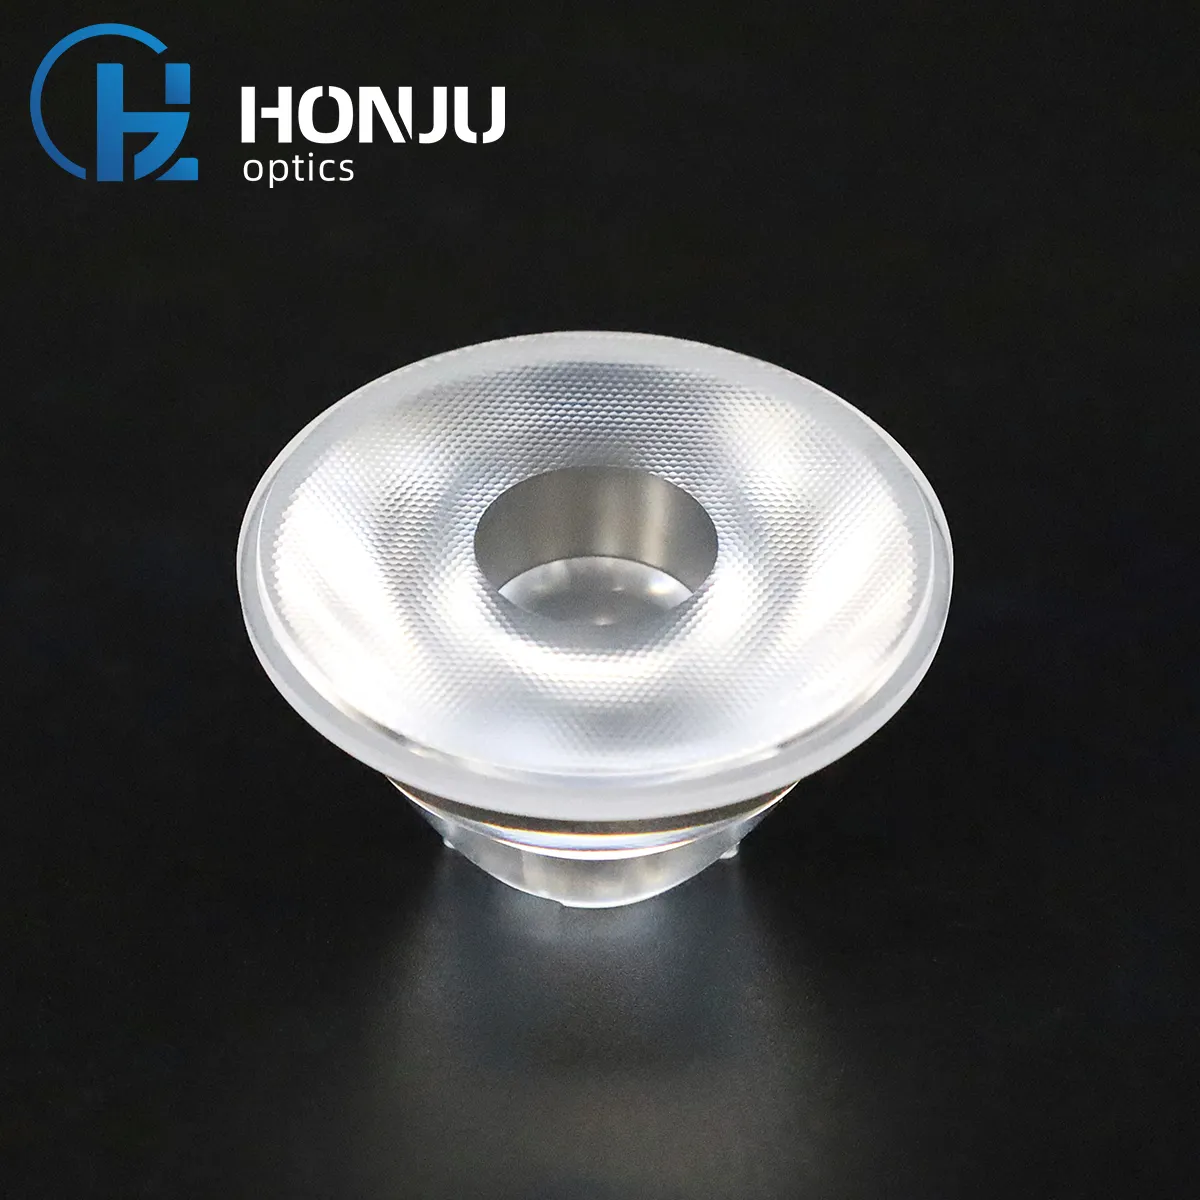 Manufacturing Latest Product Optics For Hotel Bedroom Wall Washer Lamp Indoor Relief sculpture Lighting Lens Led Cob Lenses